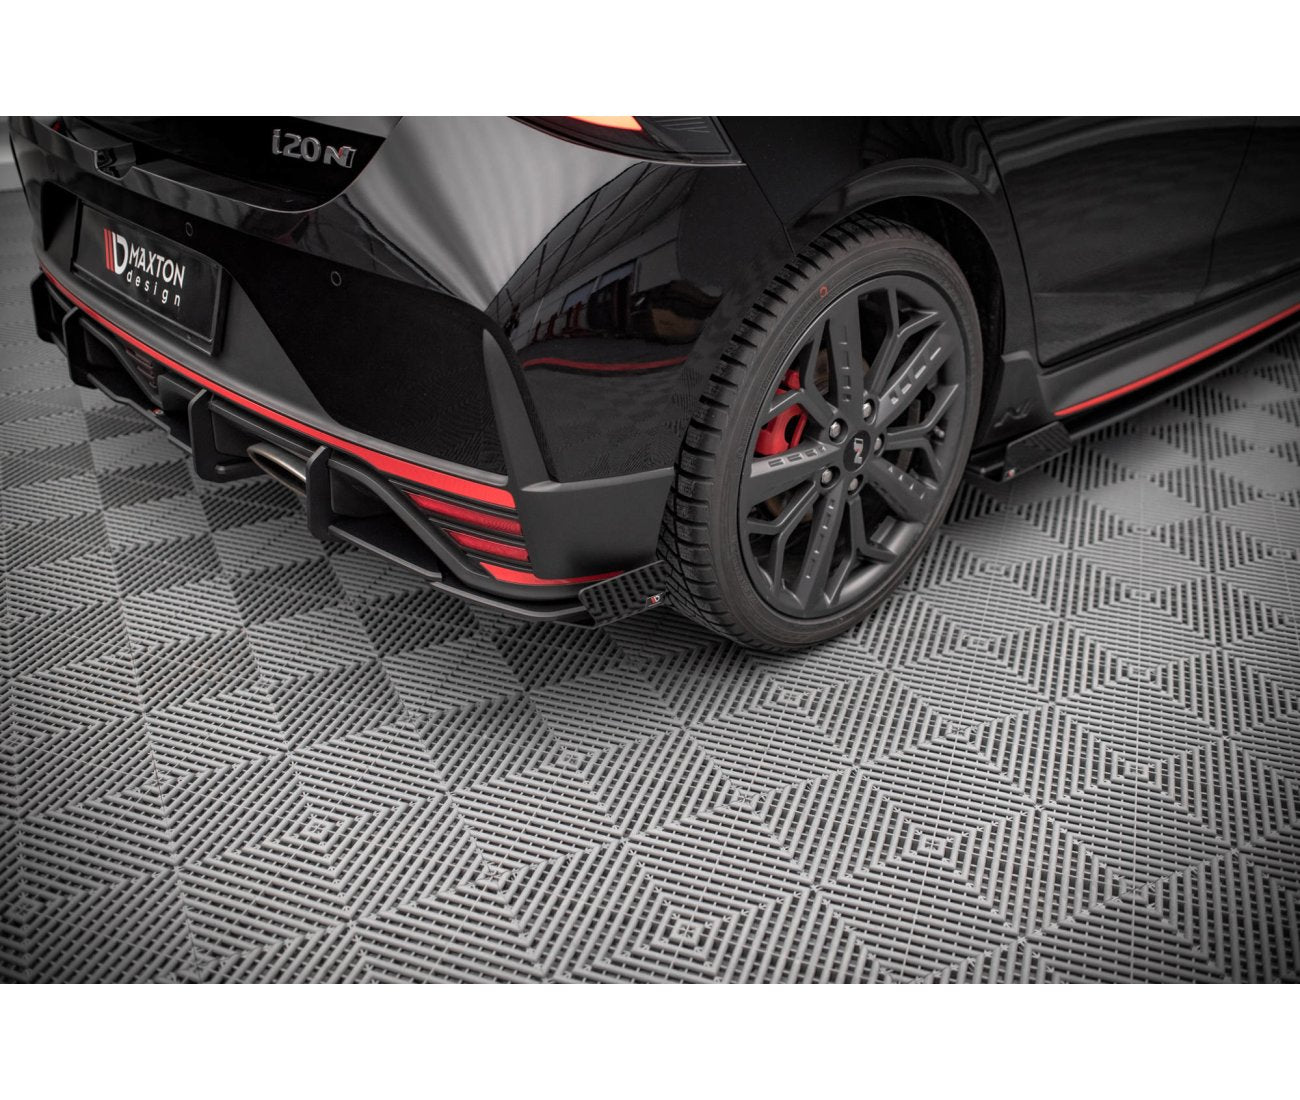 Street Pro Rear Extension + Flaps for Hyundai I20N